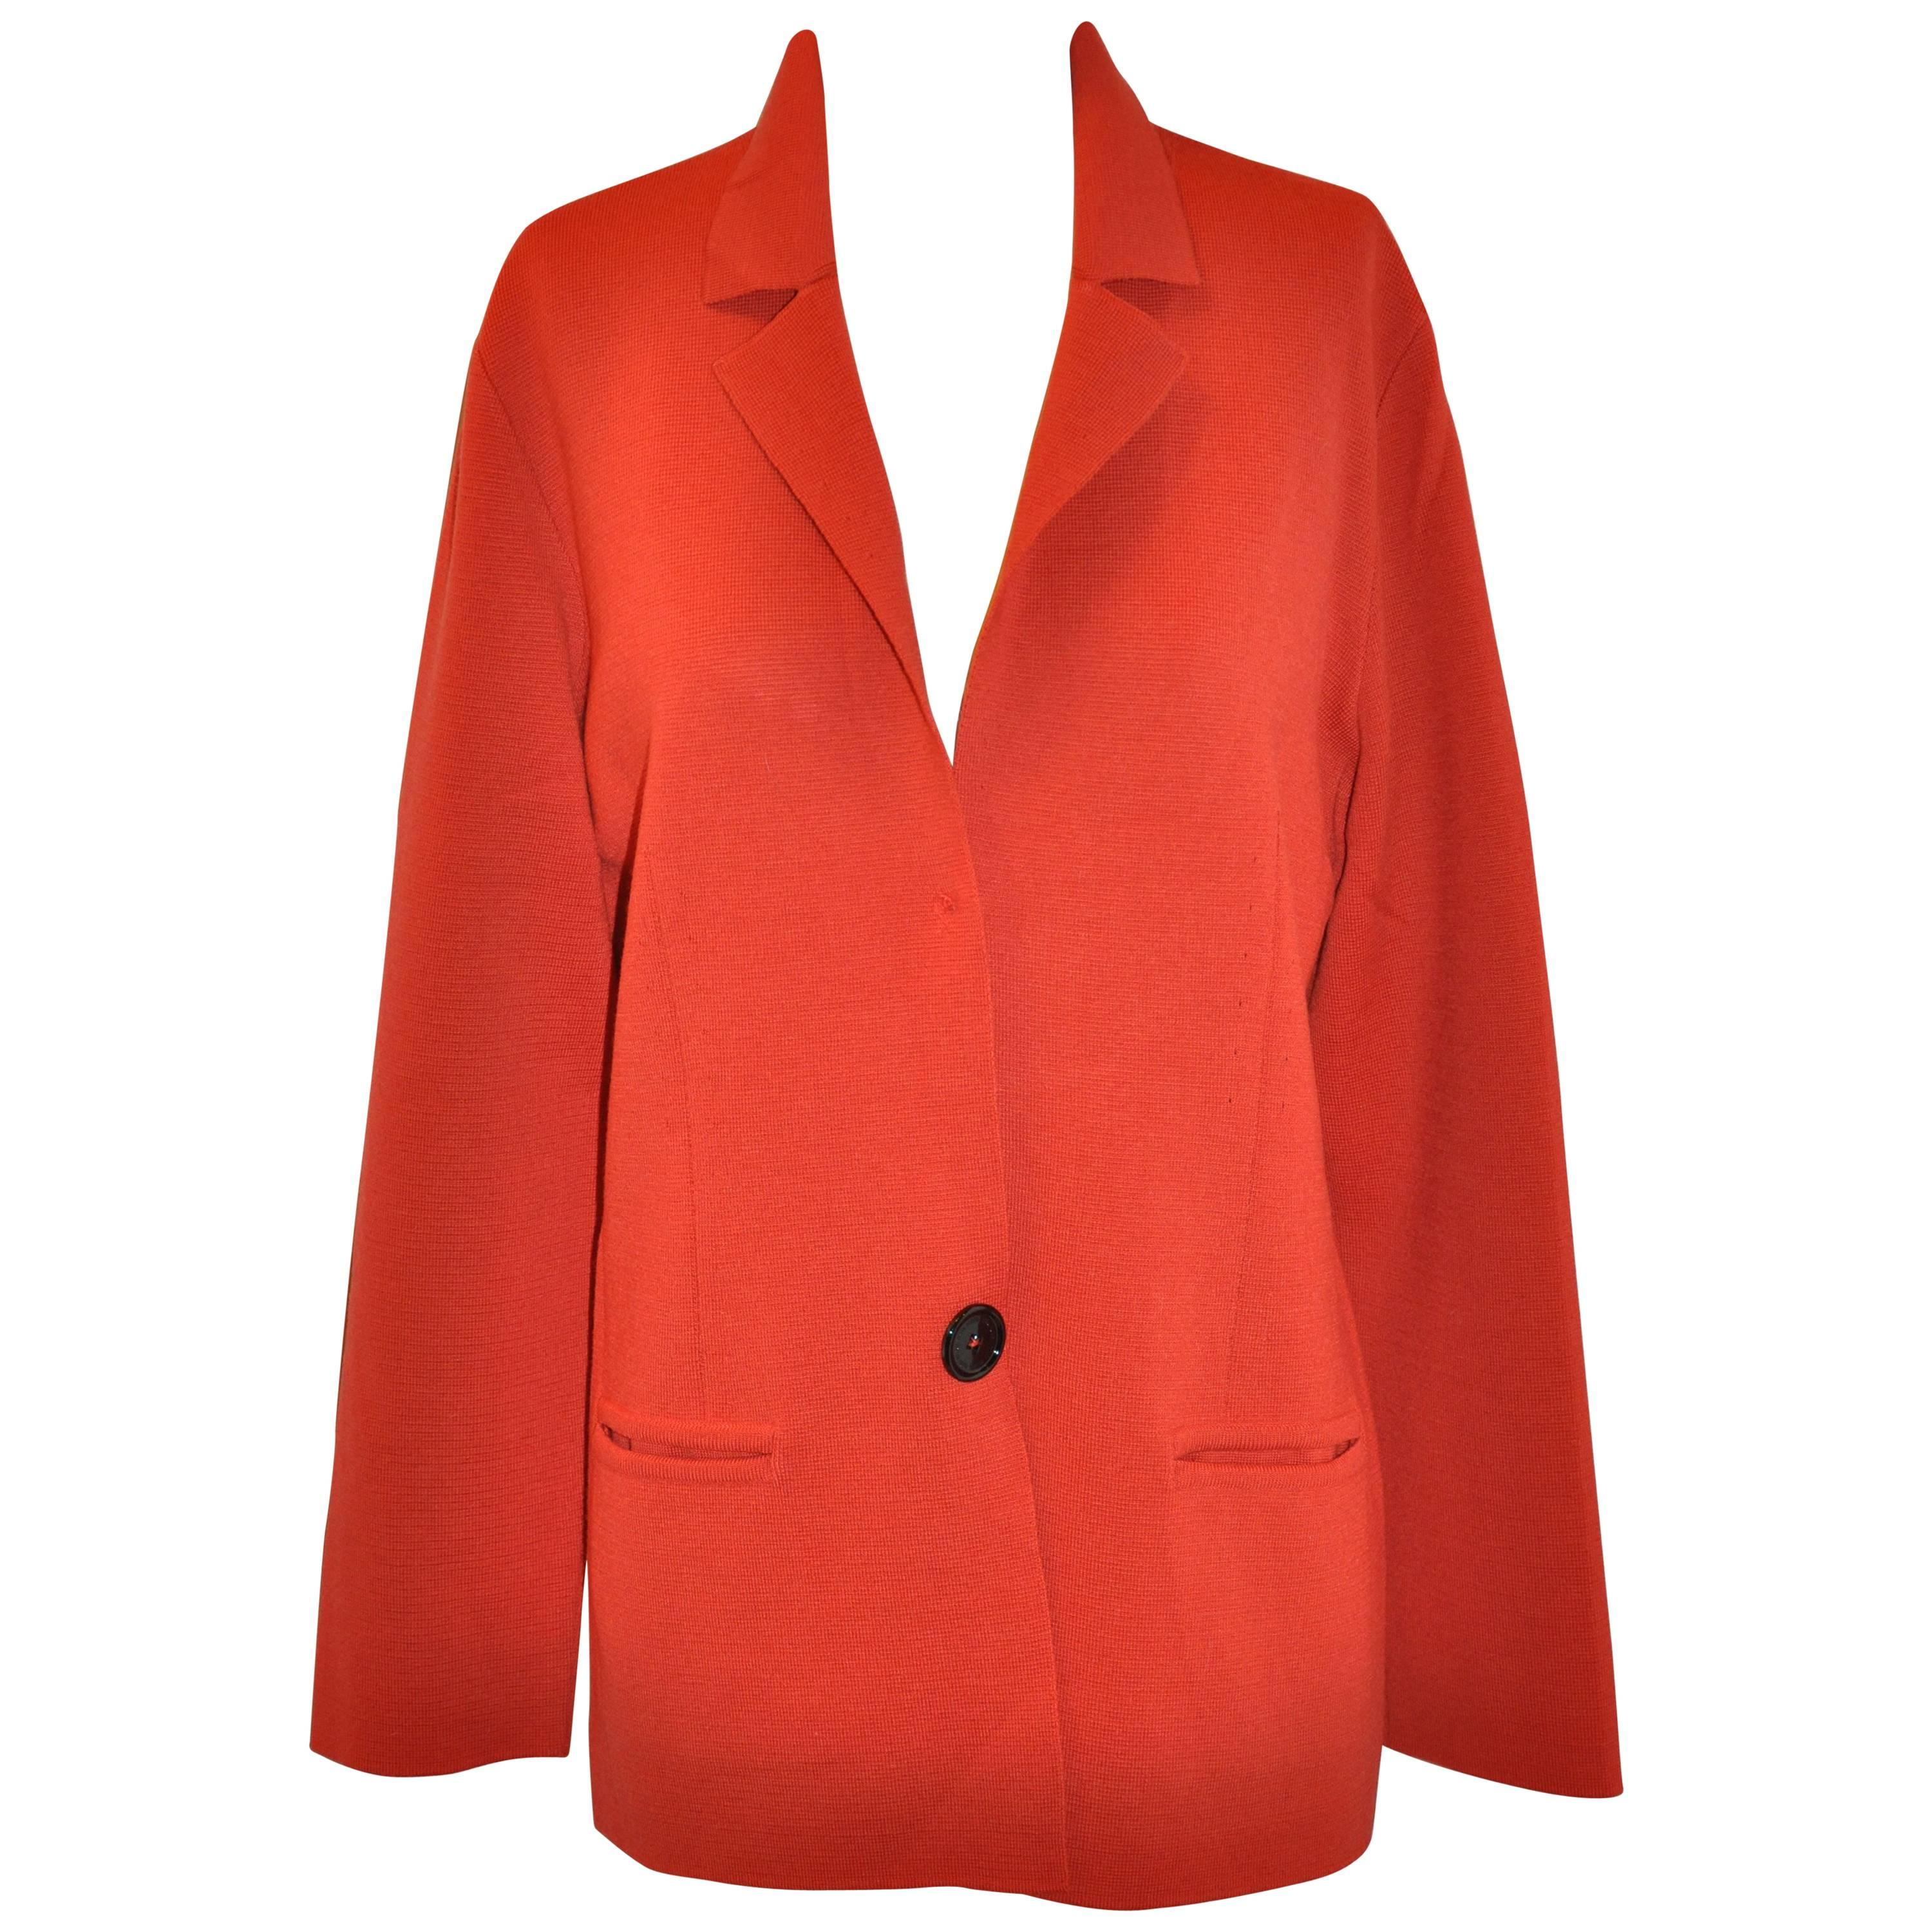 Mila Schon by Gabriella Frattini Italian Red Wool Snap Front Knit Jacket For Sale